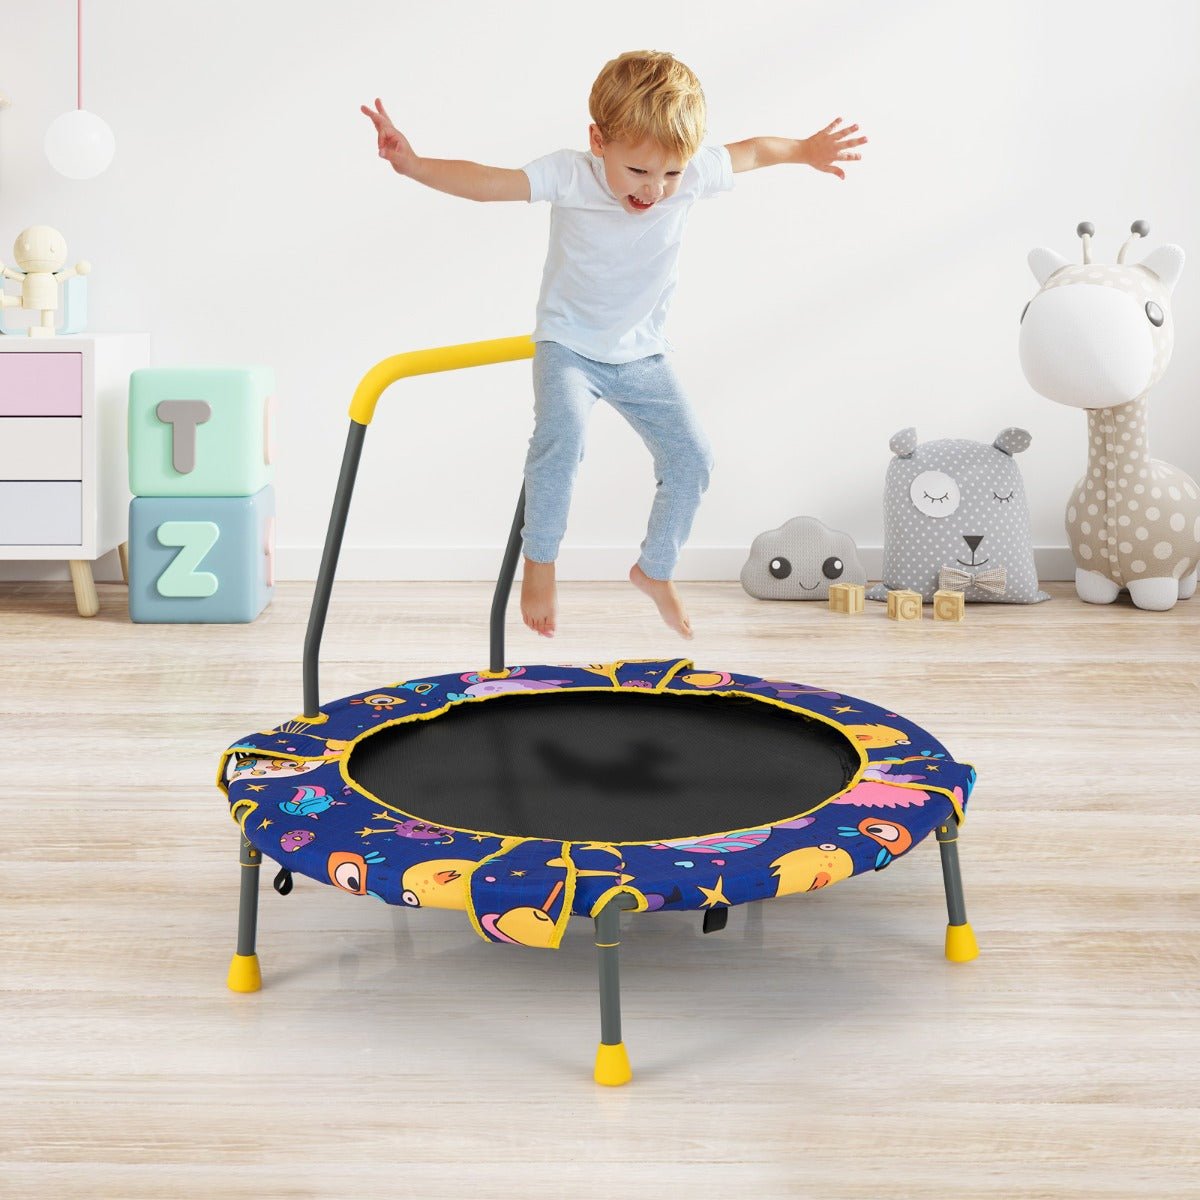 Swing into Happiness: Convertible Swing and Trampoline Set with Upholstered Handrail for Kids